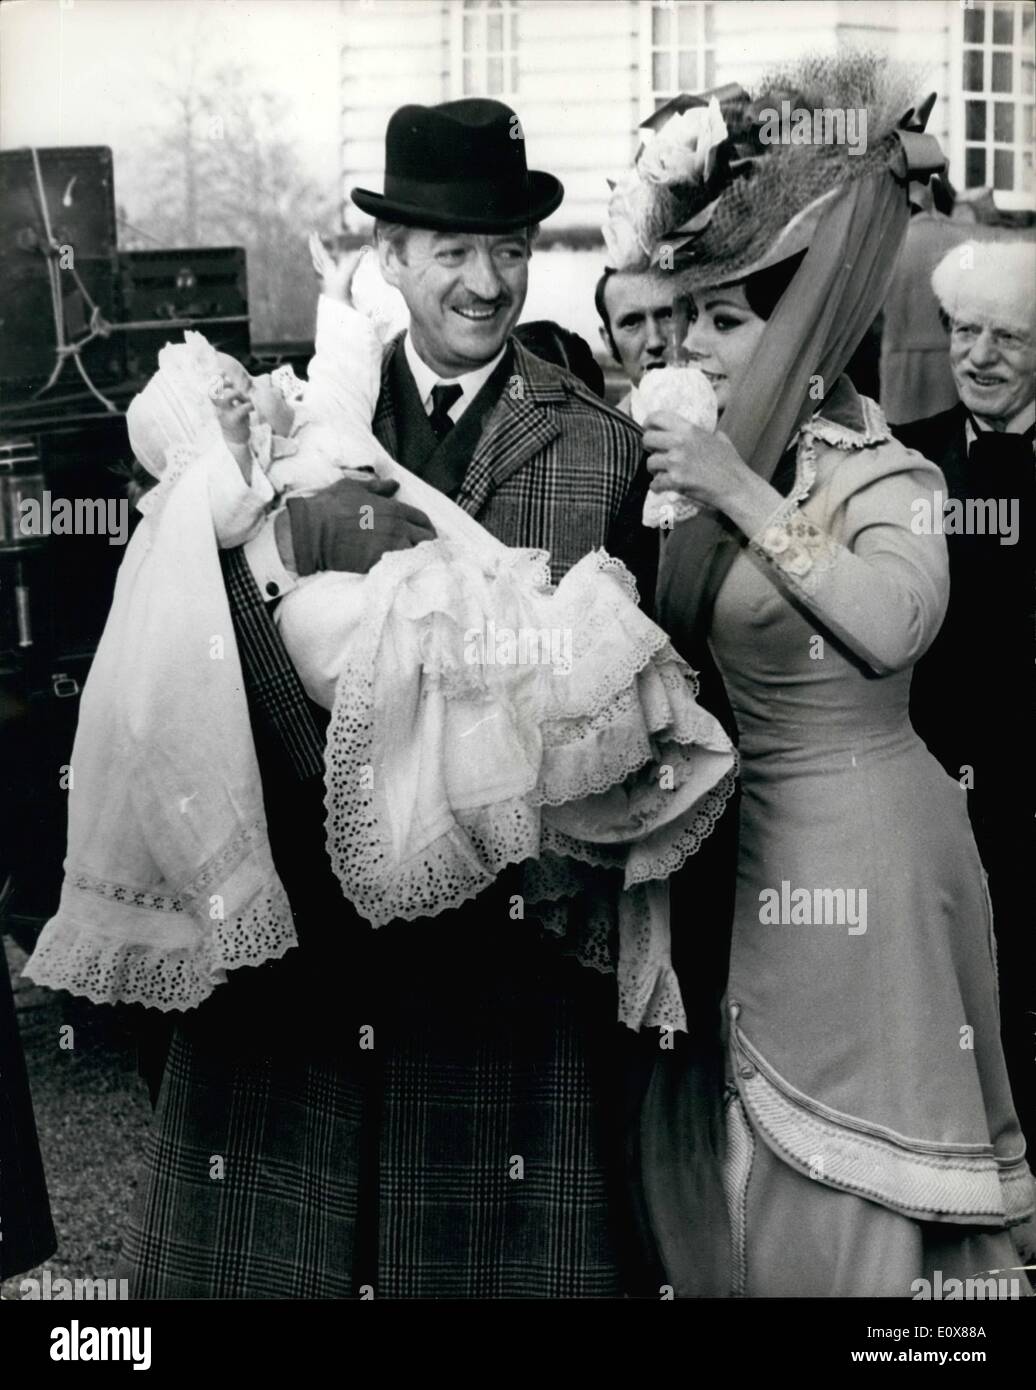 Sep. 09, 1965 - Edwardian Heir returns - with the most Beautiful Mother in the world.: It was a great occasion at Castle Howard/ Chambermaids, butlers, footman turned out in troupes - no shortage of staff here - to see the returned of the baby heir brought by his master father - and with him his ex-trollop who had been no better than she should but had had her honour given back to he when the the baby's father put the ring on her finger. But this was no ordinary trollop mother. It was Sophia Loren Stock Photo